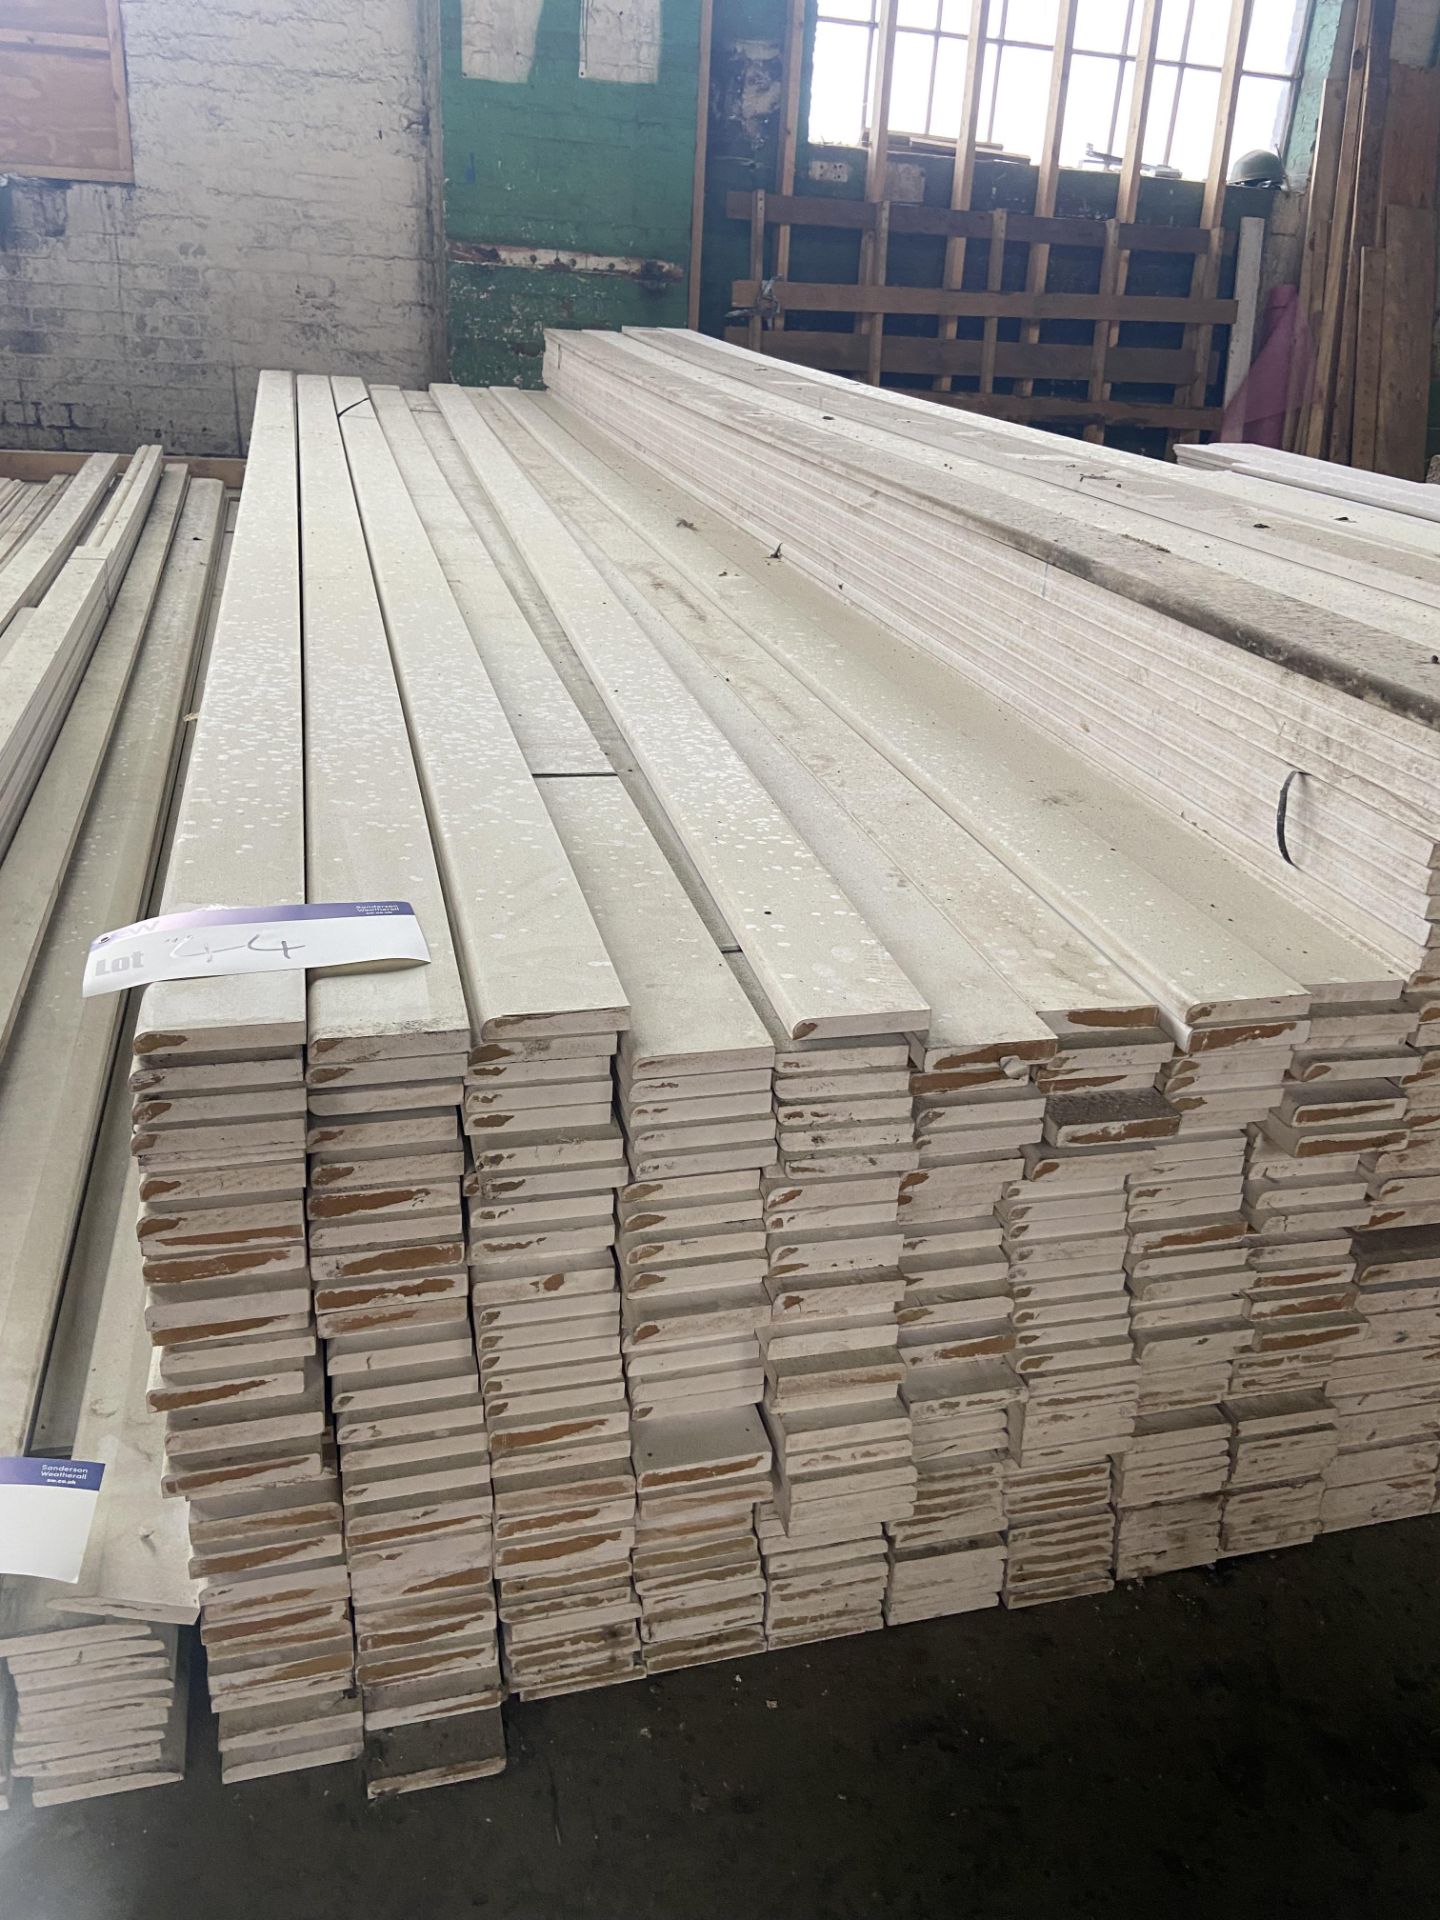 Approx. 279 Lengths of MDF Primed Round Skirting Boards, each approx. 95mm x 18mm x 4.4m long, as